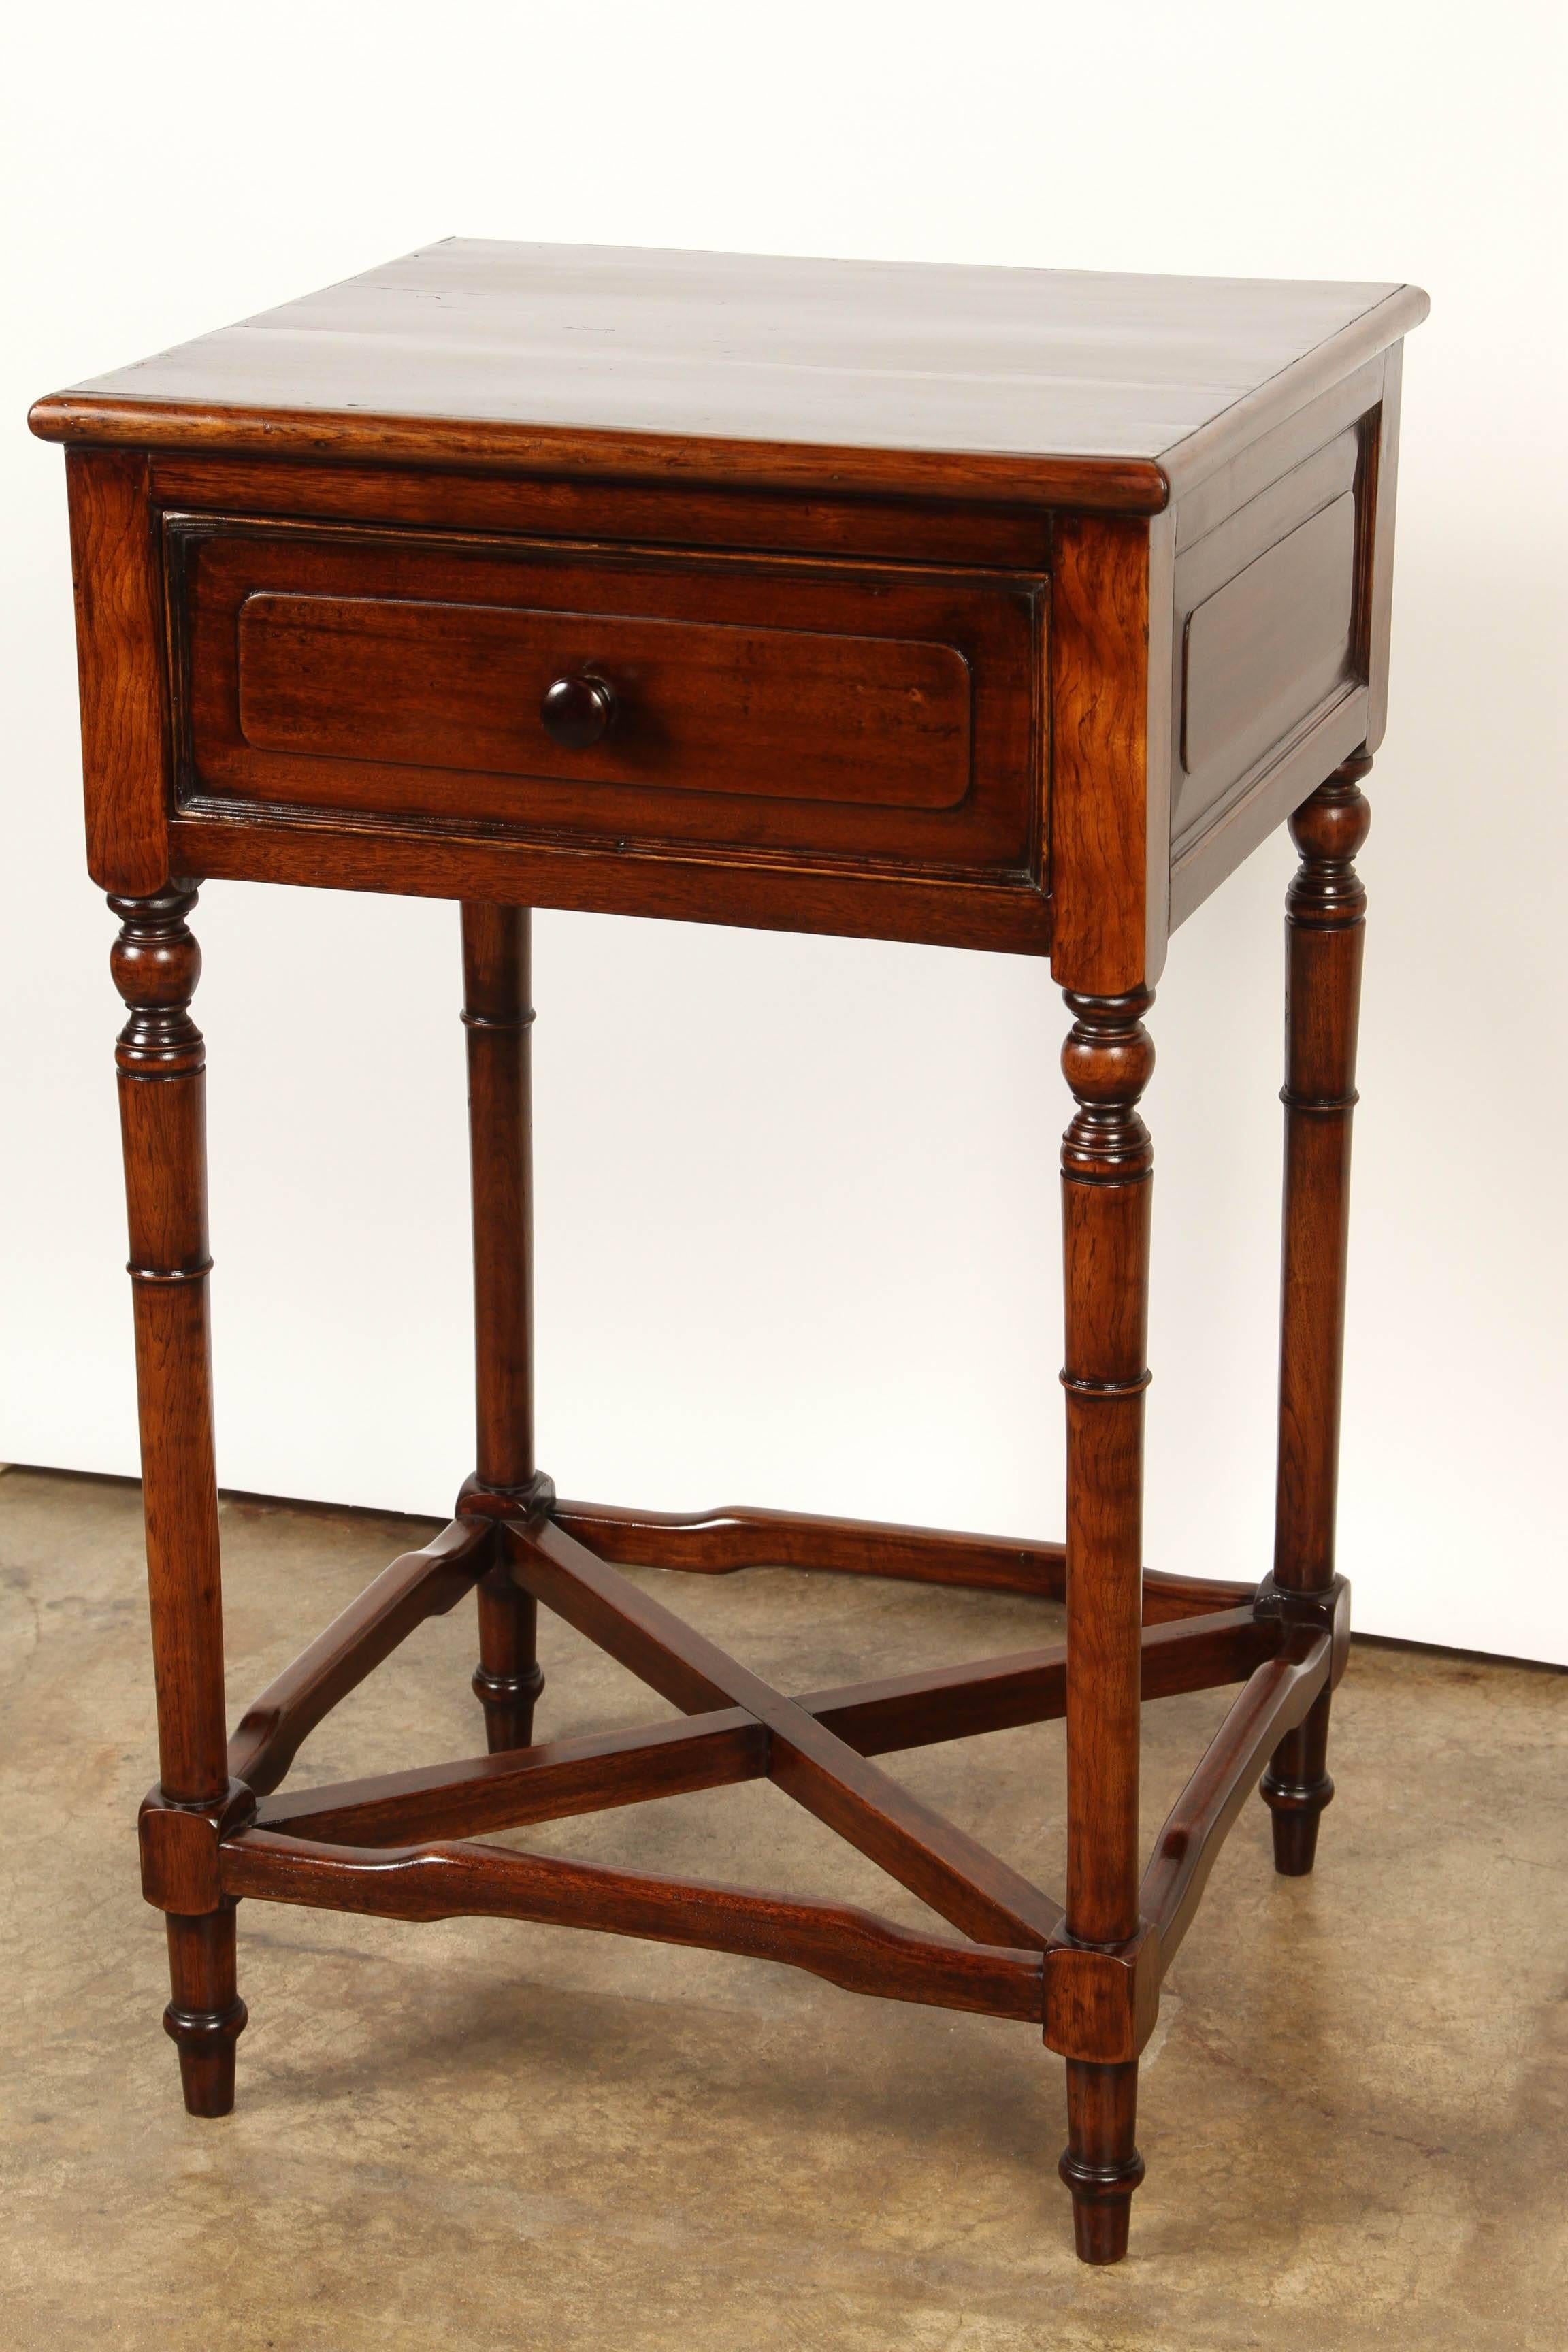 Made for the Local French market, this Vietnamese console table is made from Solid indigenous rosewood. The top of this rosewood table is supported by four turned legs and a central stretcher.